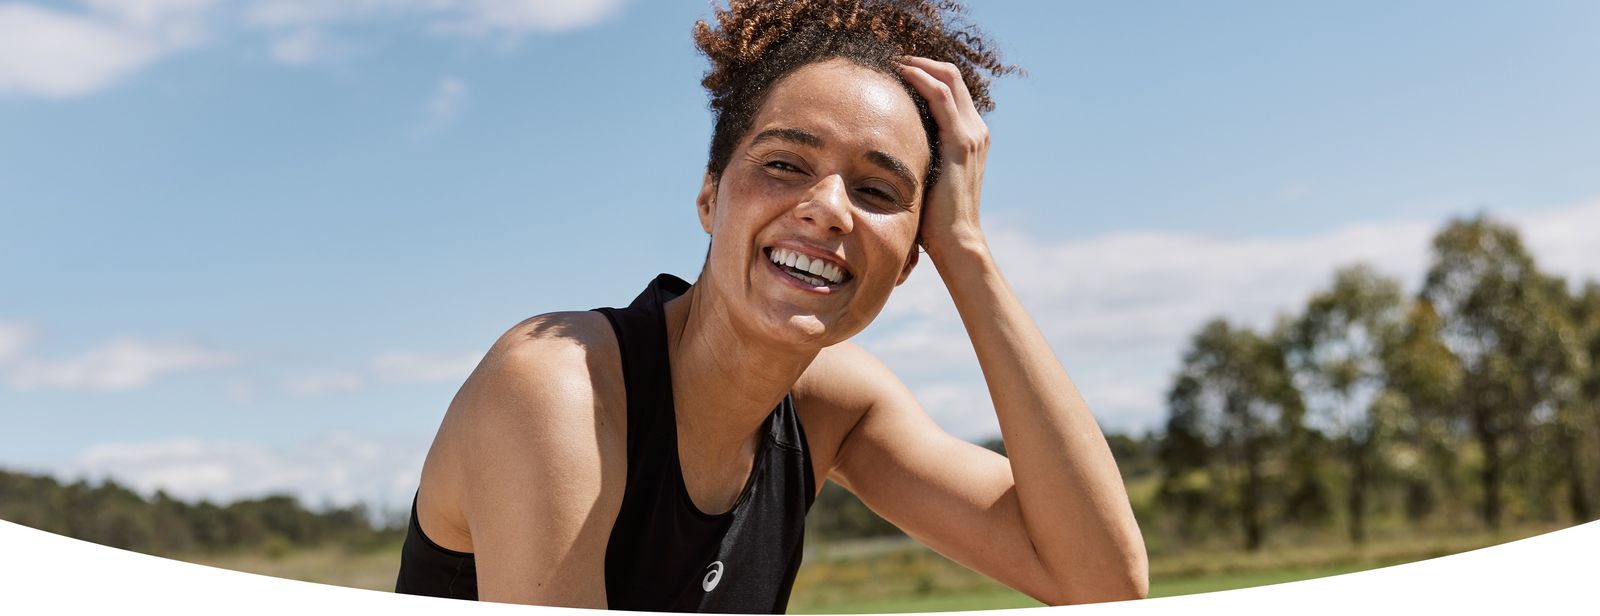 A female runner sits in the grass laughing and smiling toward the camera with her hand in her hair, wearing a black ASICS sleeveless top